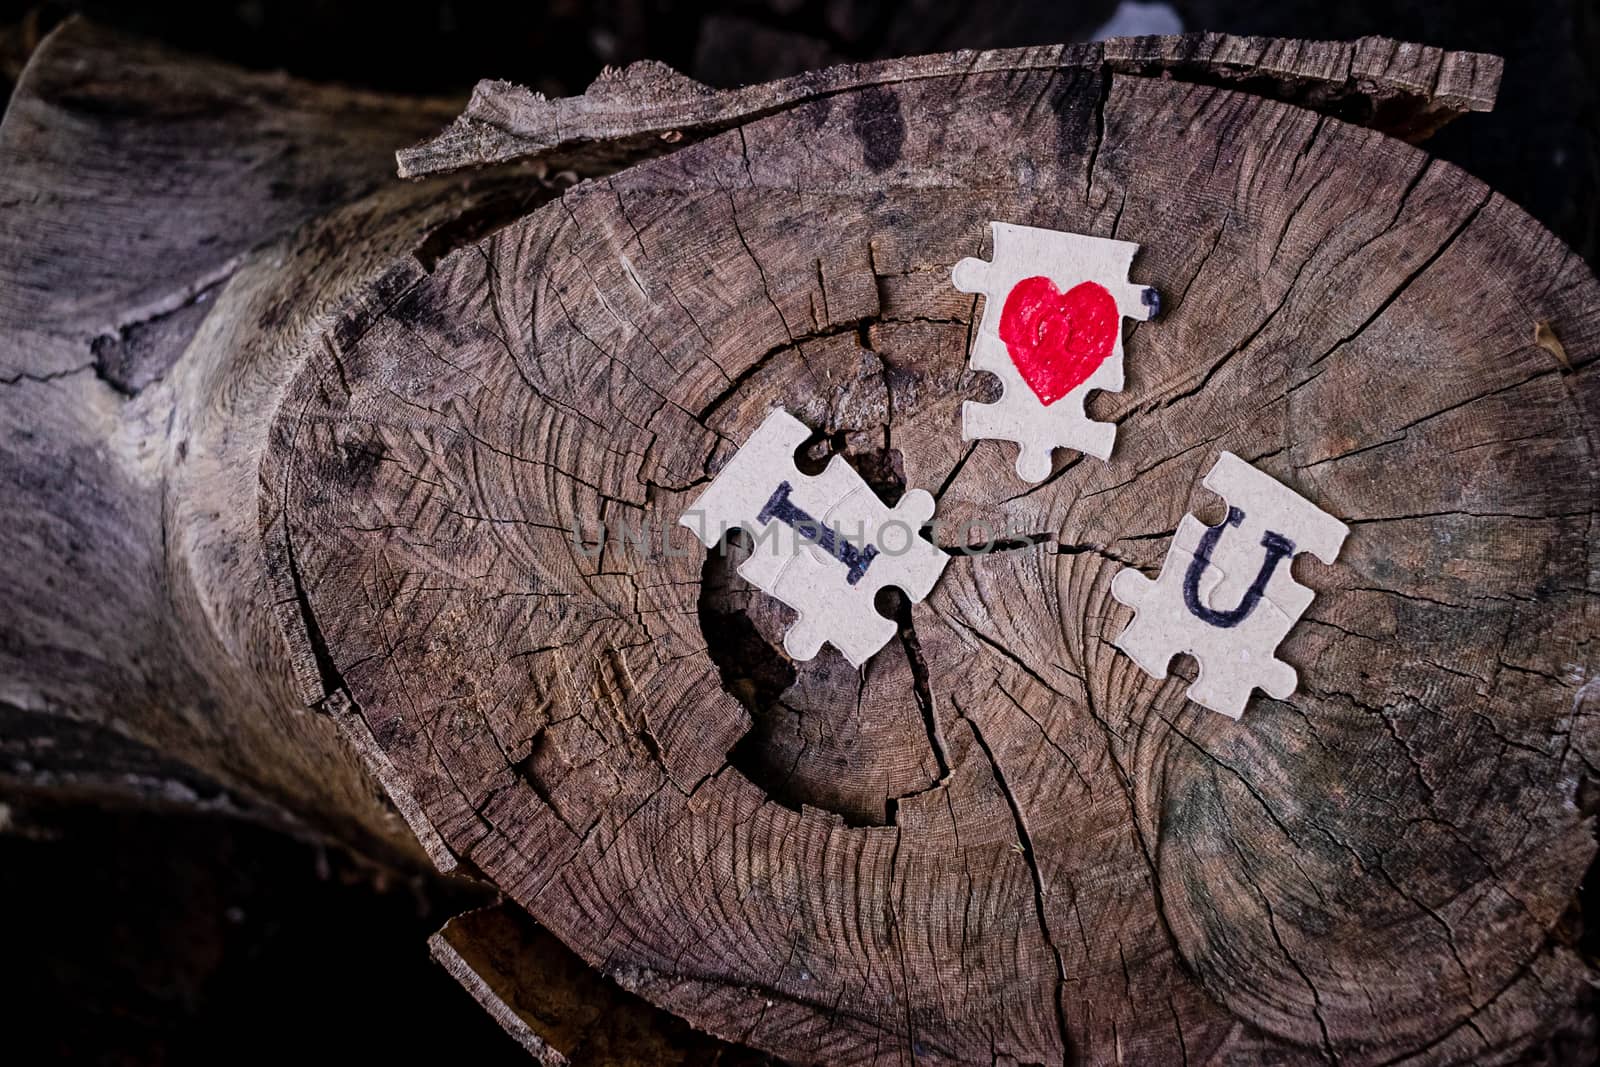 A picture of a paper jigsaw put on a tree stump and write that I love you